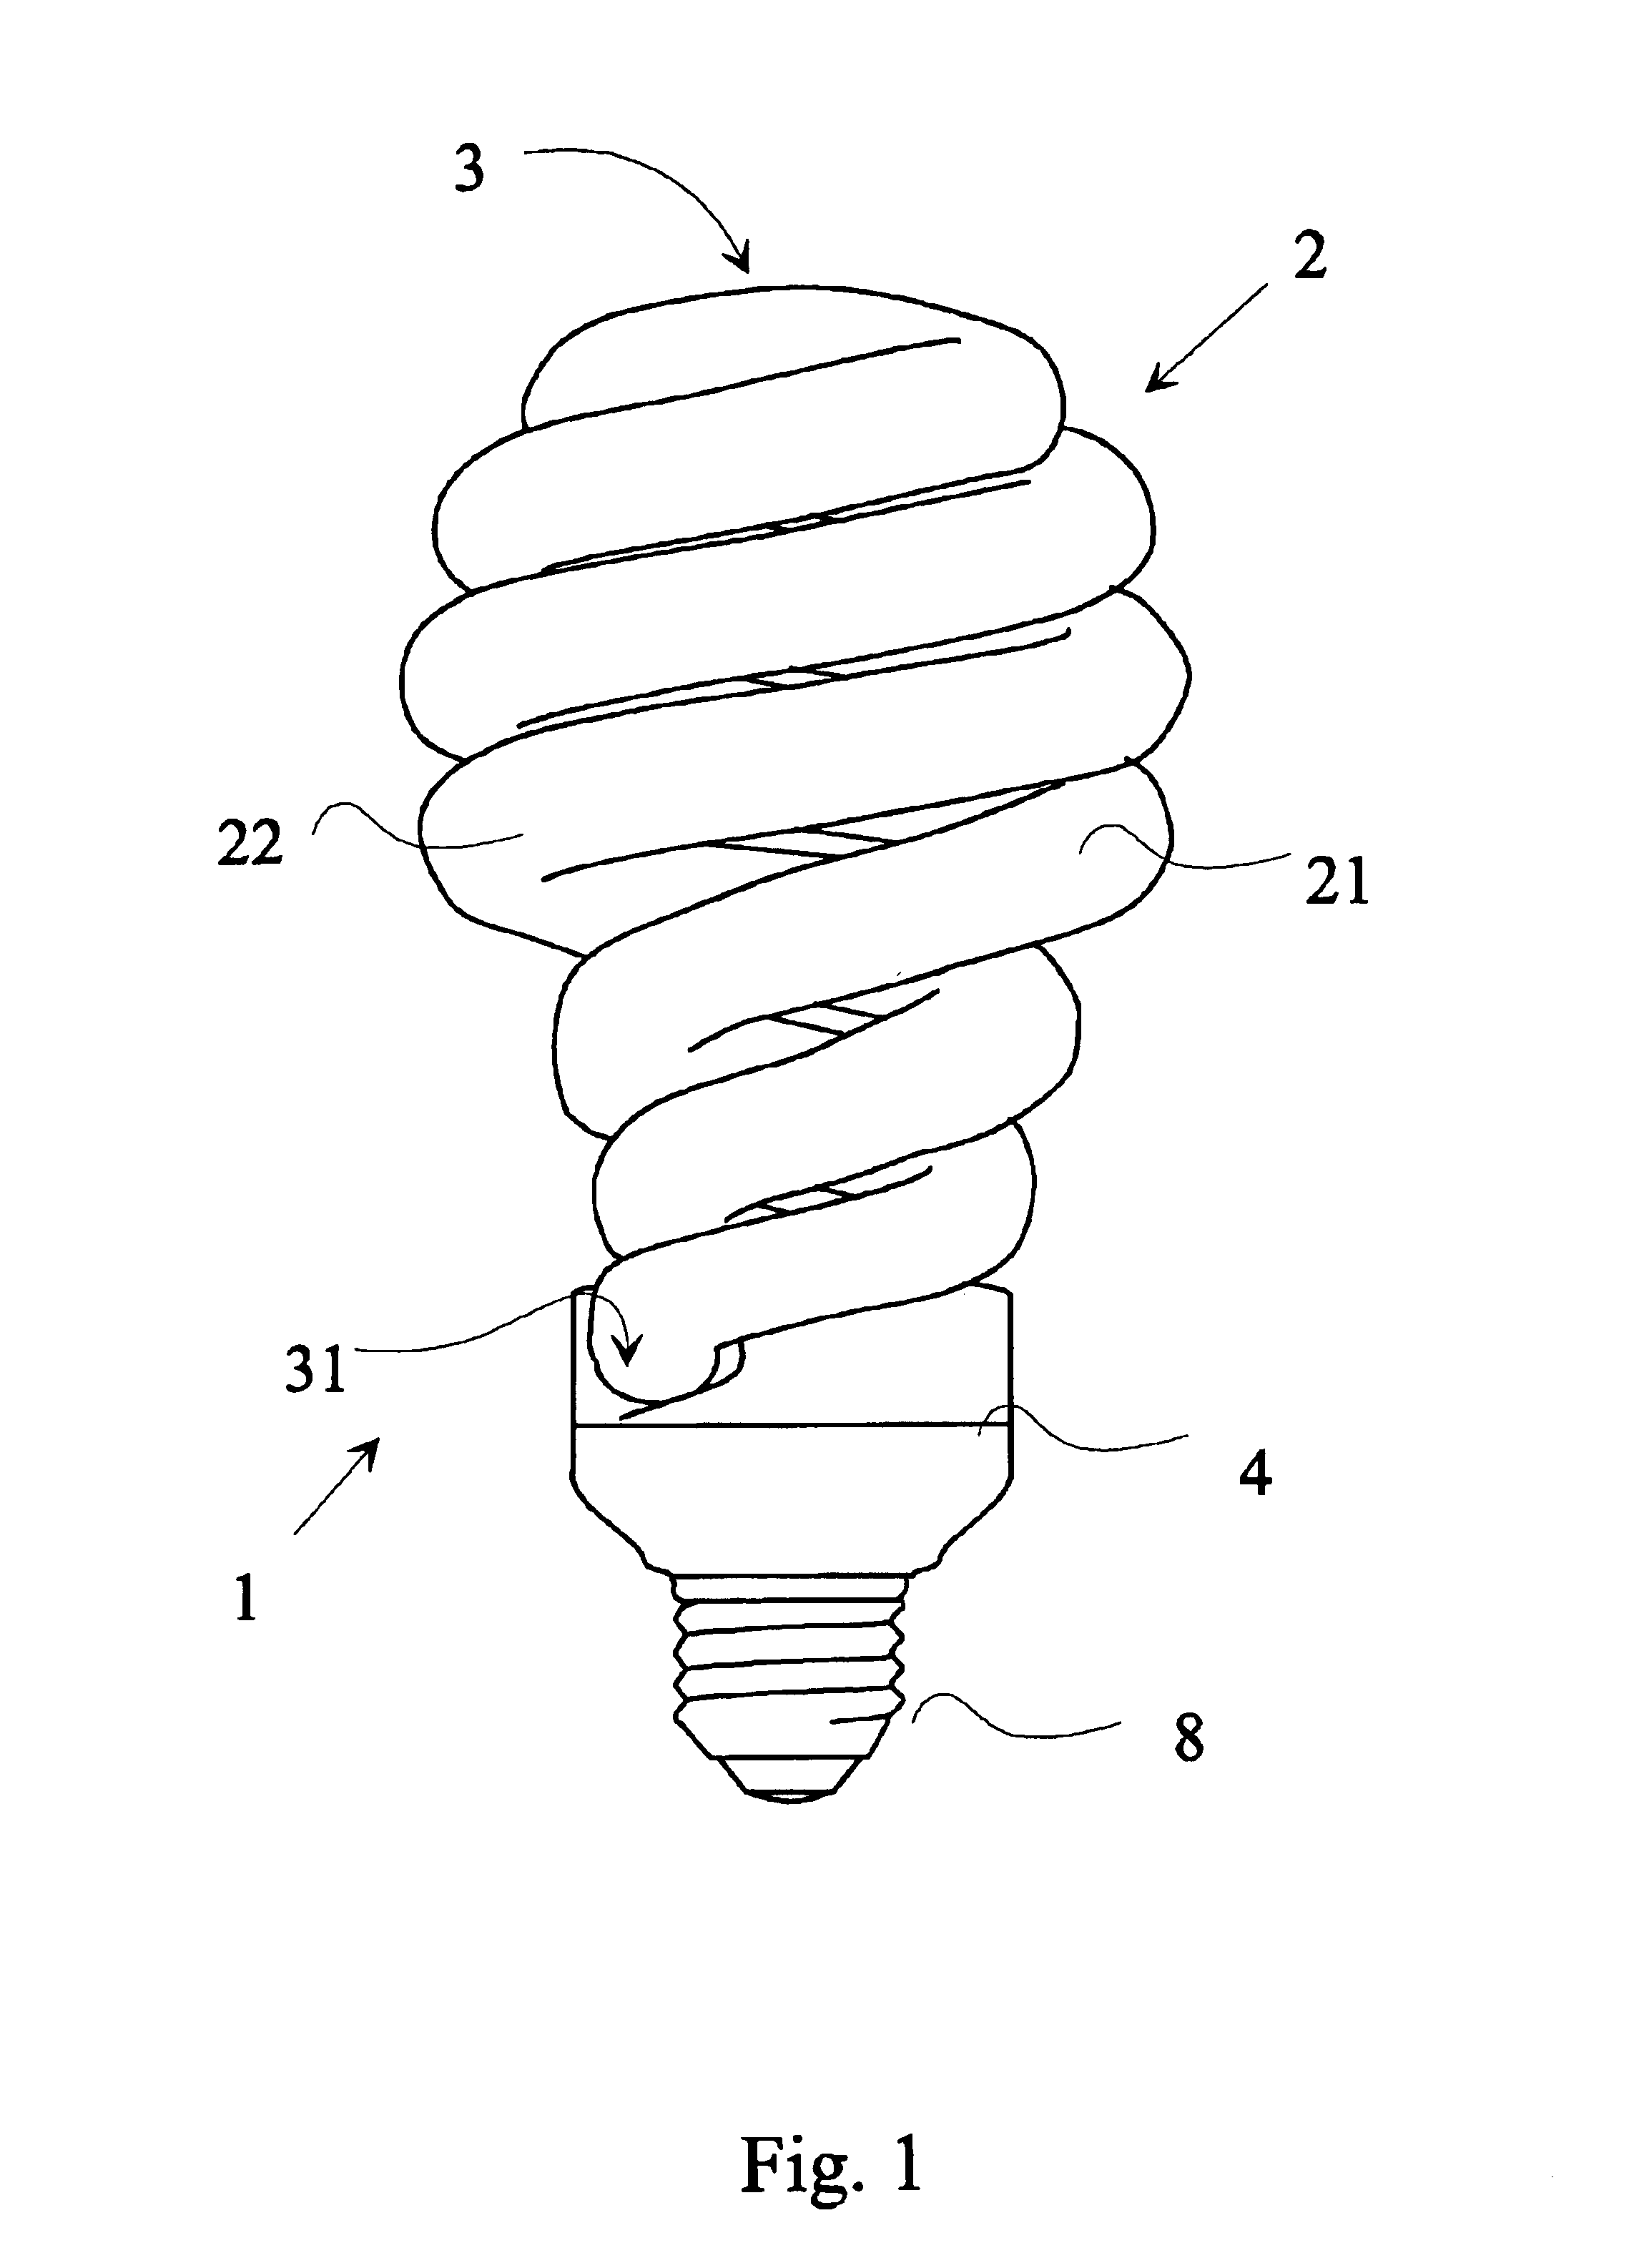 Method of and apparatus for forming discharge tubes of low-pressure discharge lamps